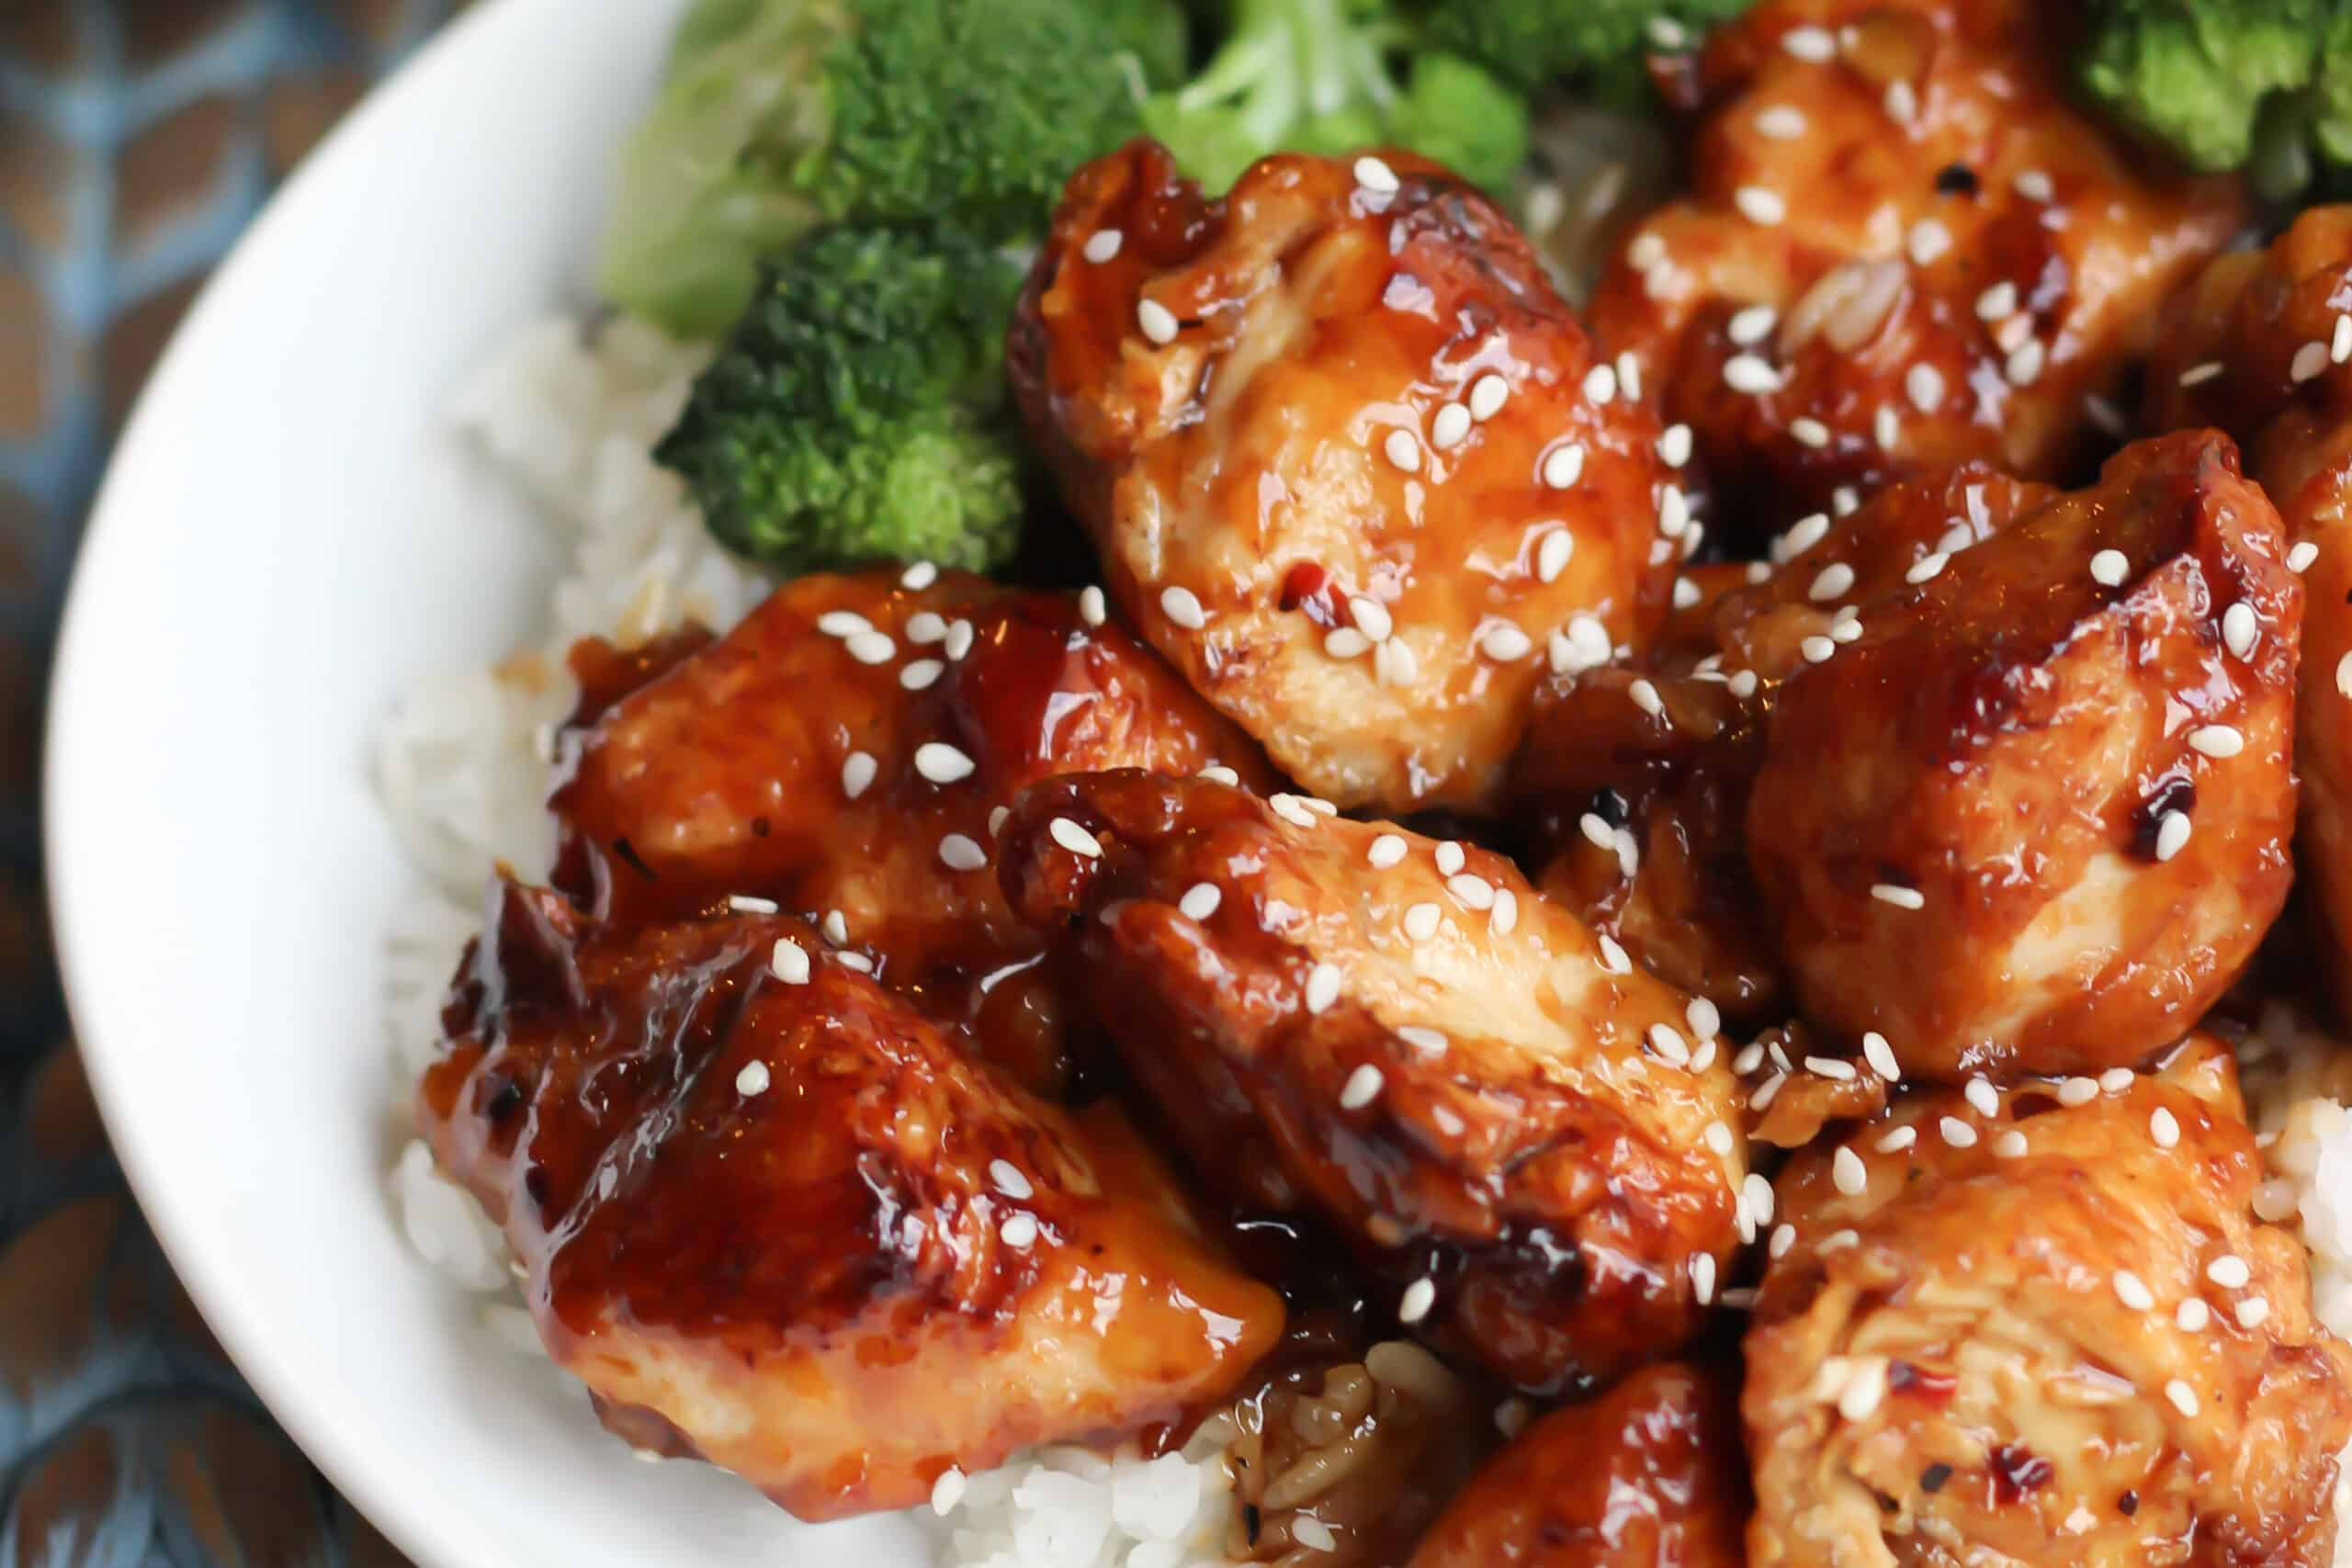 Glazed asian chicken with sesame seeds on a bed of rice and steamed broccoli.